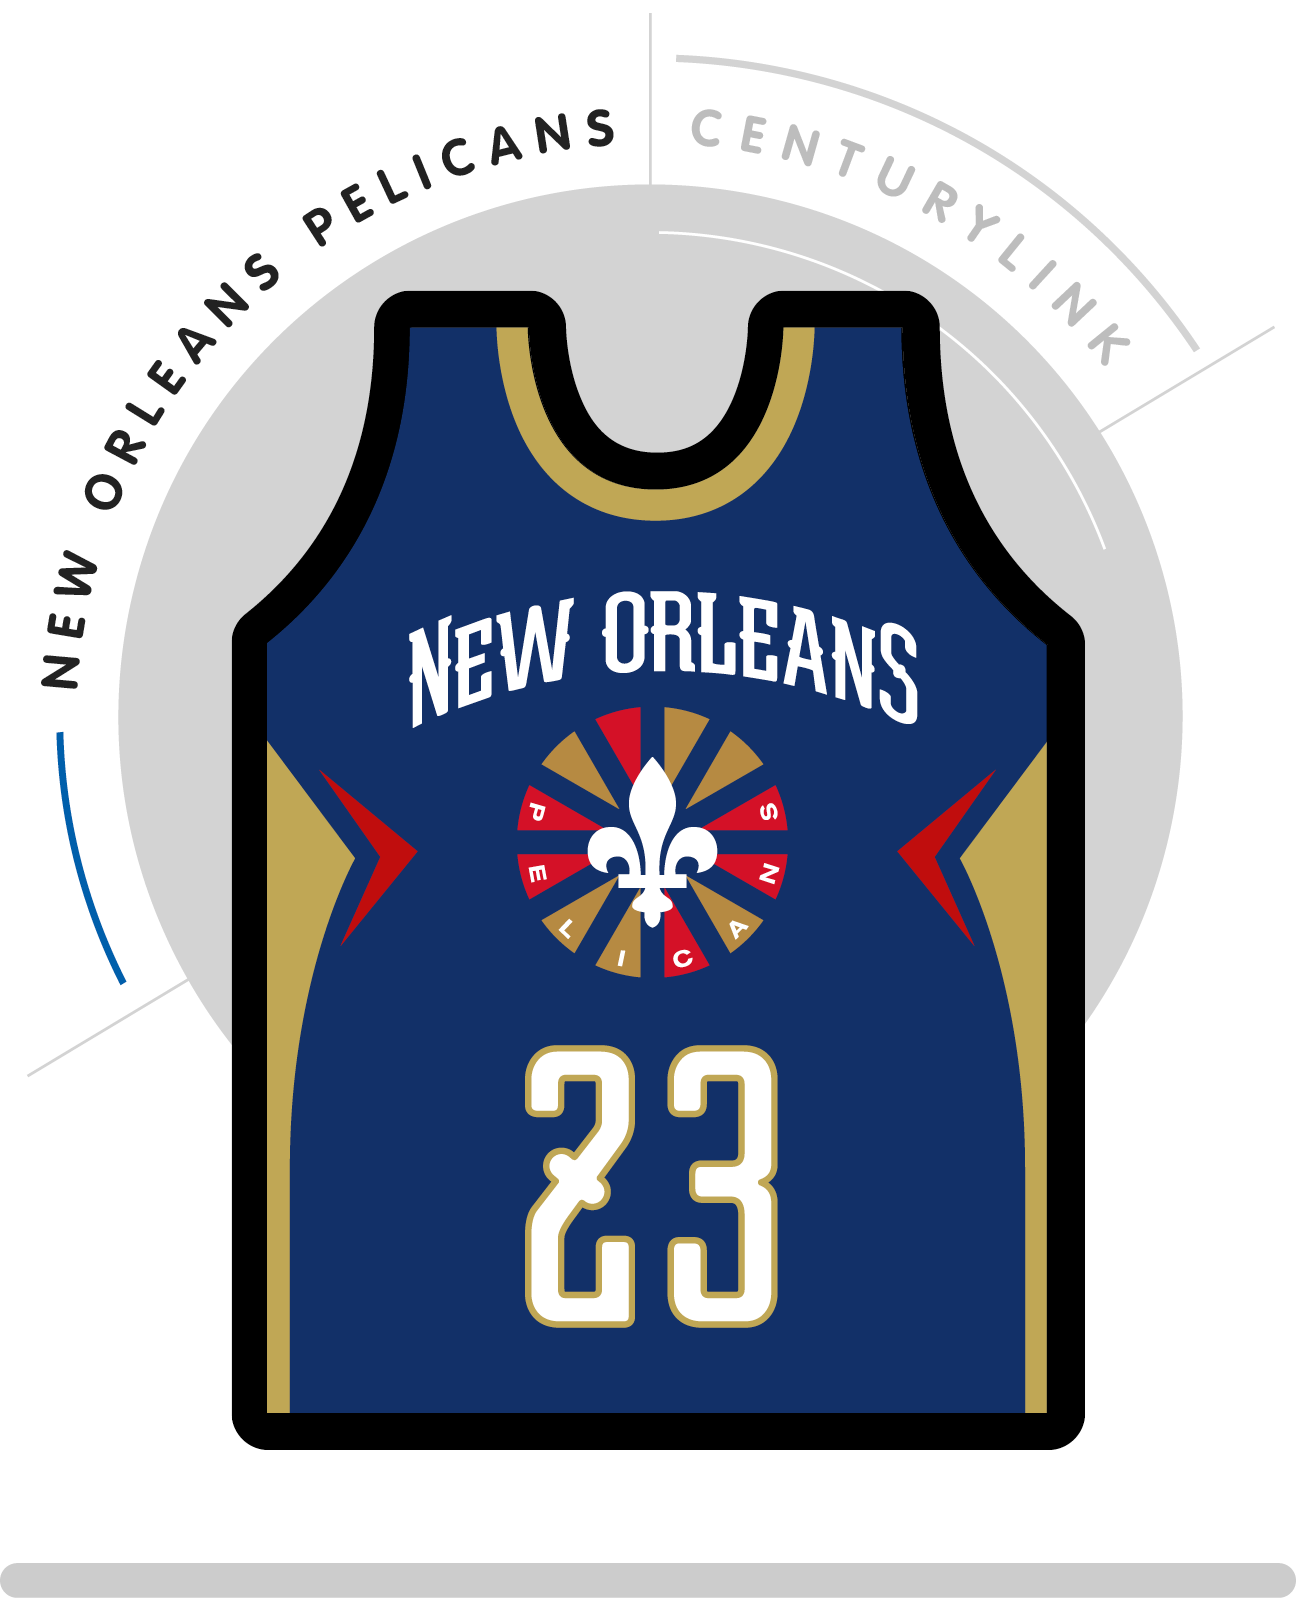 An in-depth look at NBA jerseys with full advertising